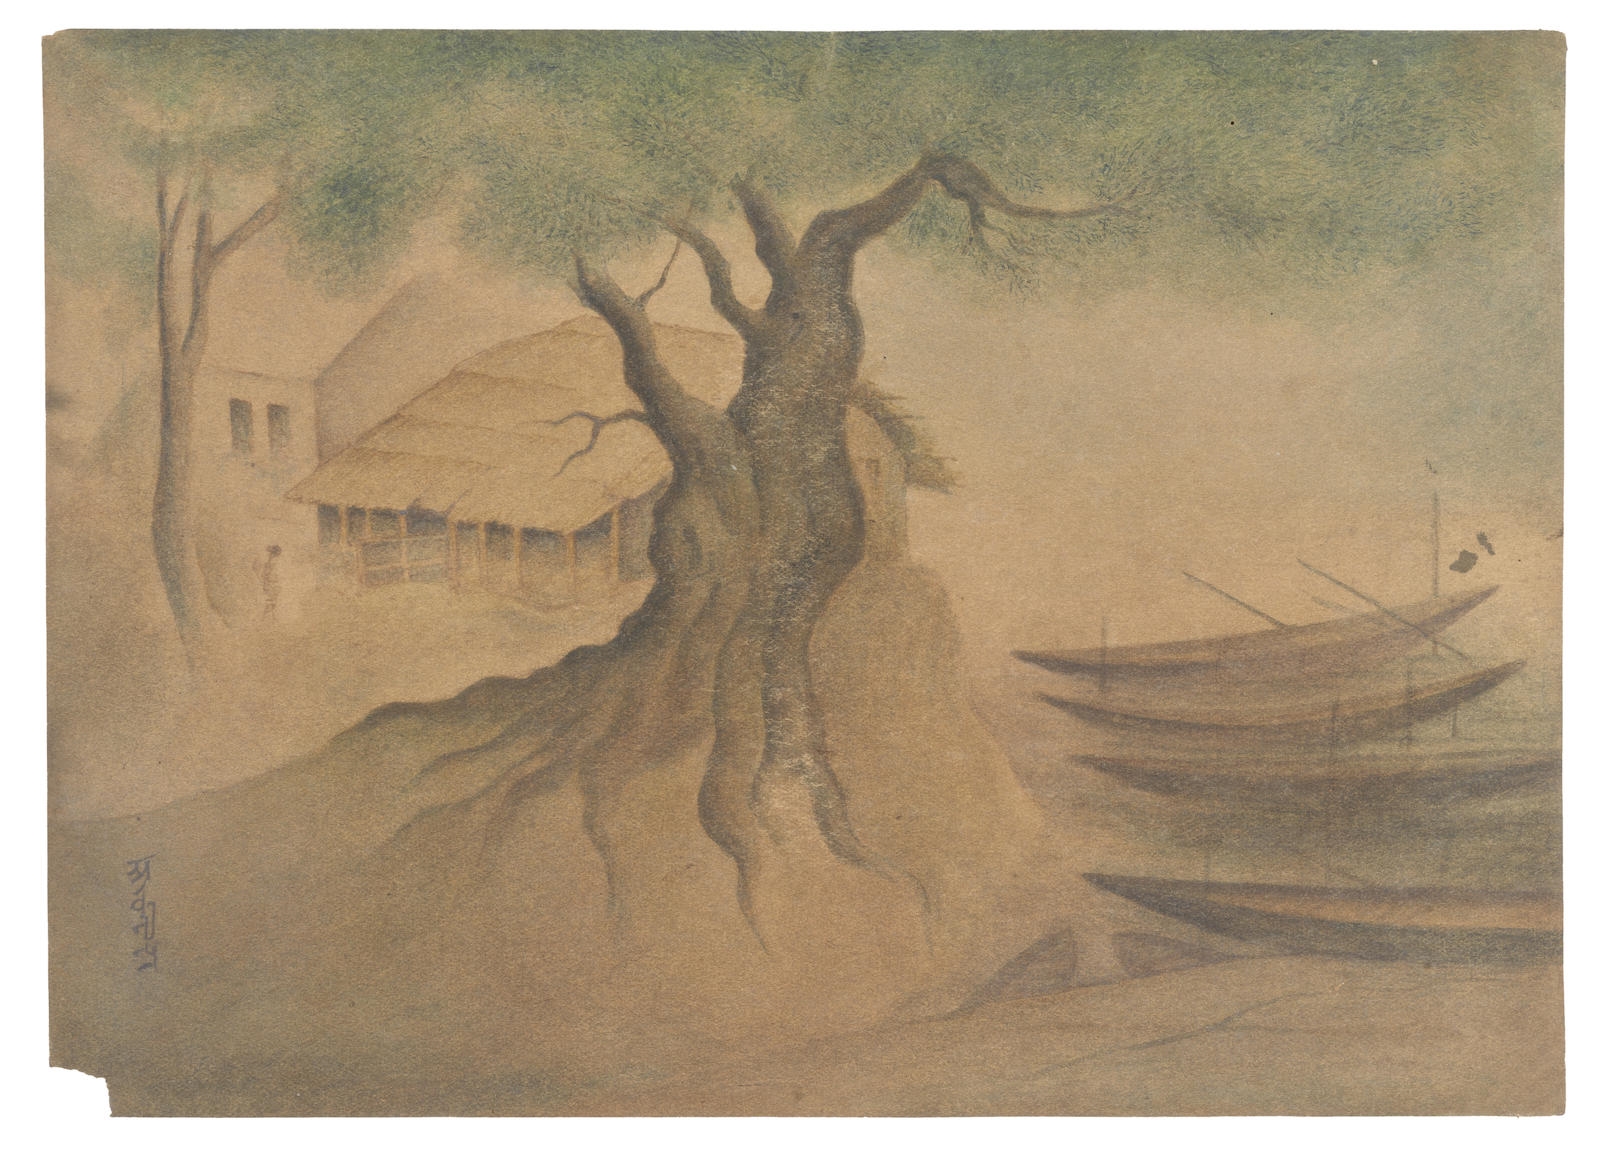 Untitled (Landscape) by Abanindranath Tagore